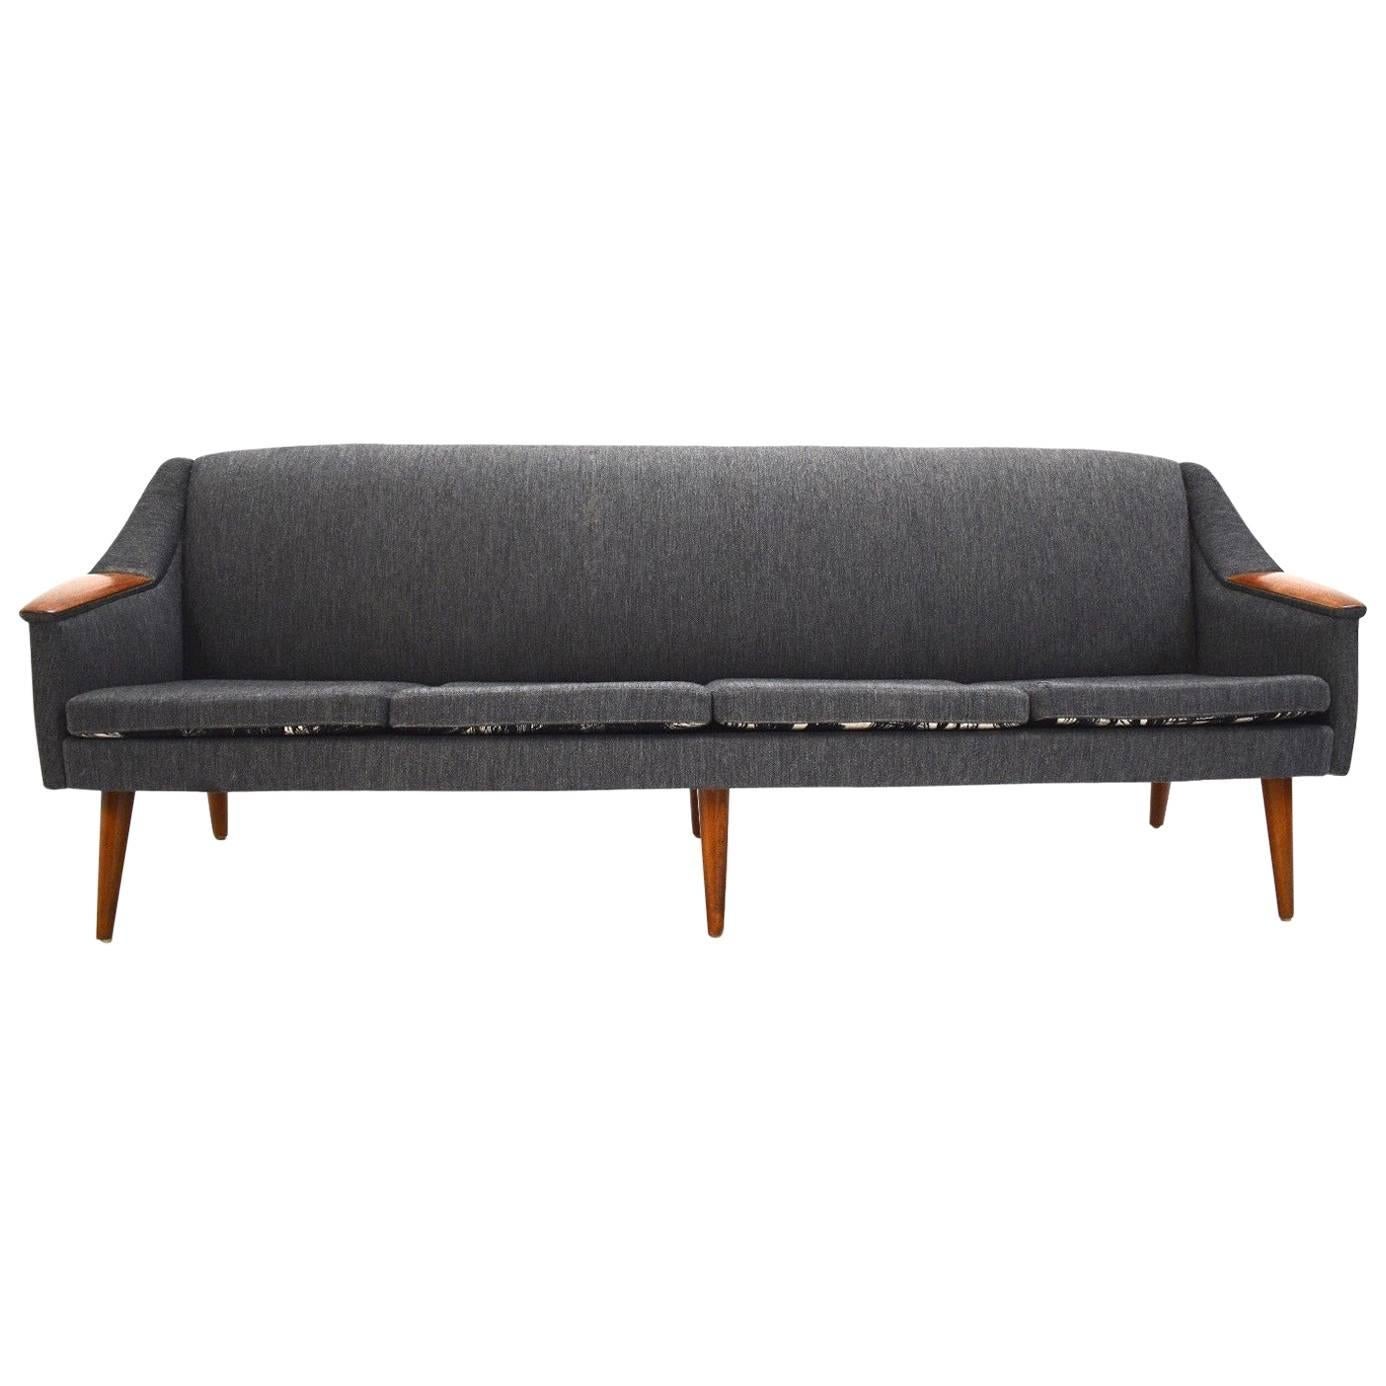 Norwegian Charcoal Grey Wool and Teak Four-Seat Sofa Midcentury, 1960s For Sale